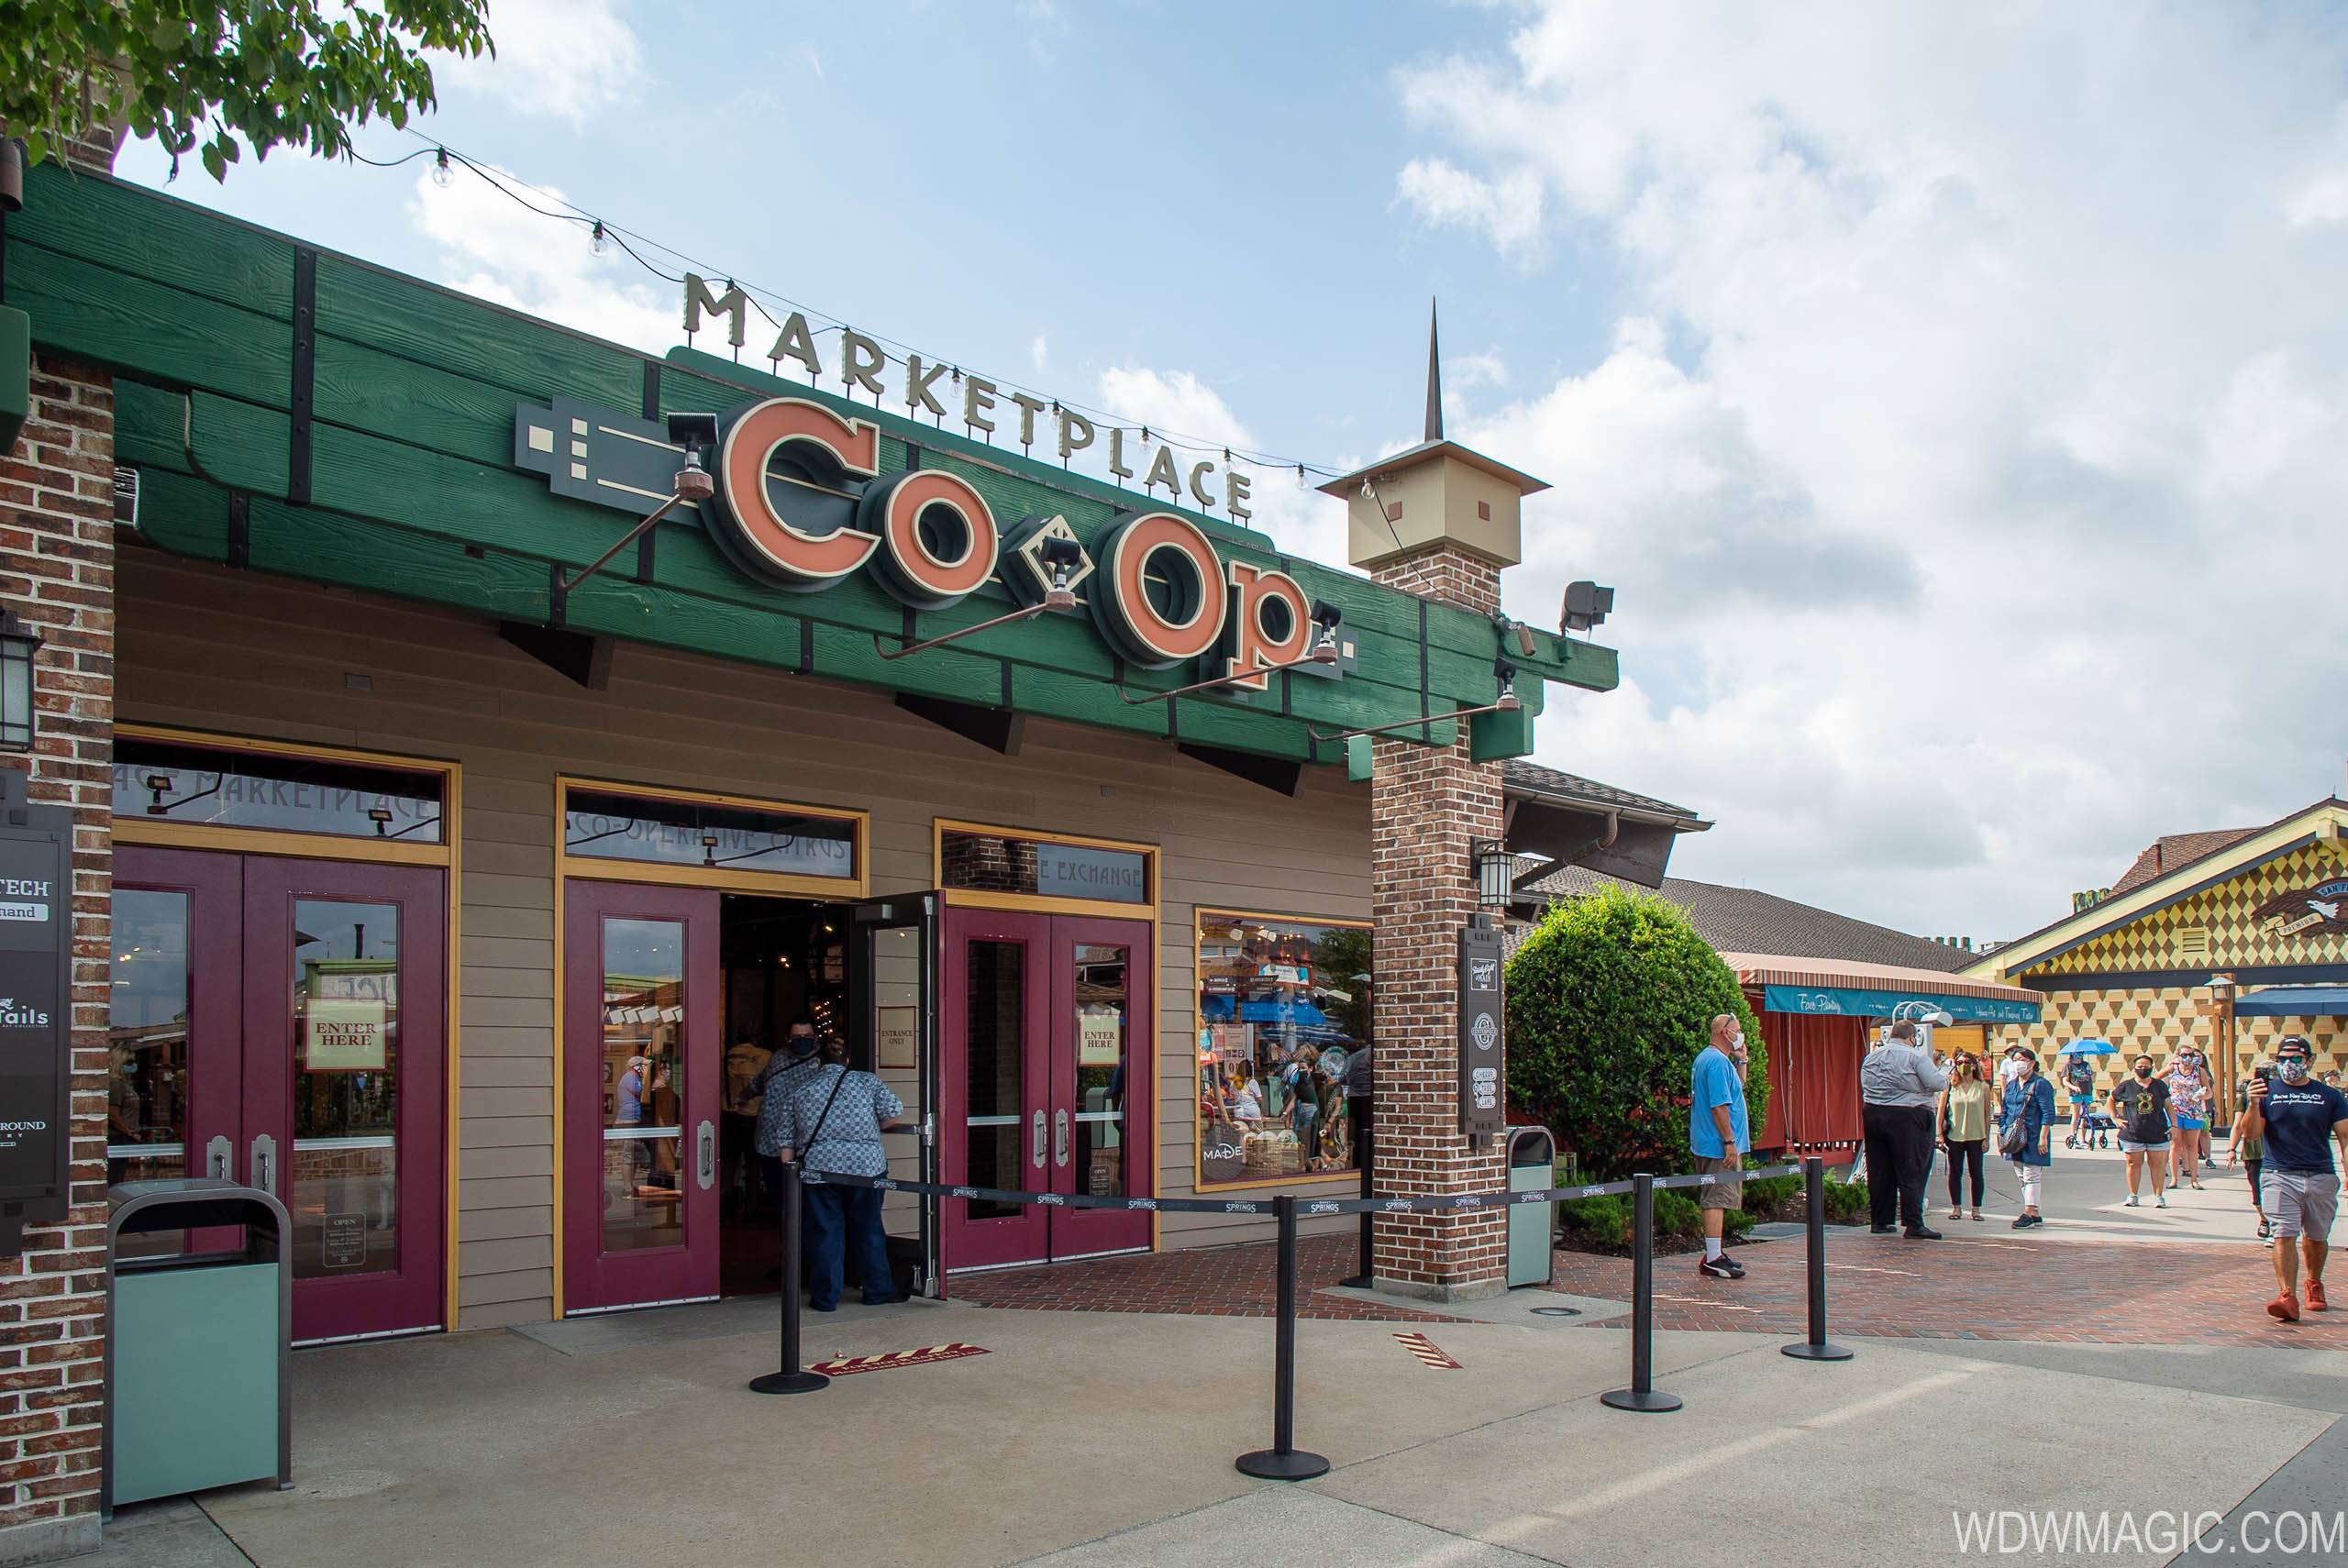 The Marketplace Co-Op at Disney Springs